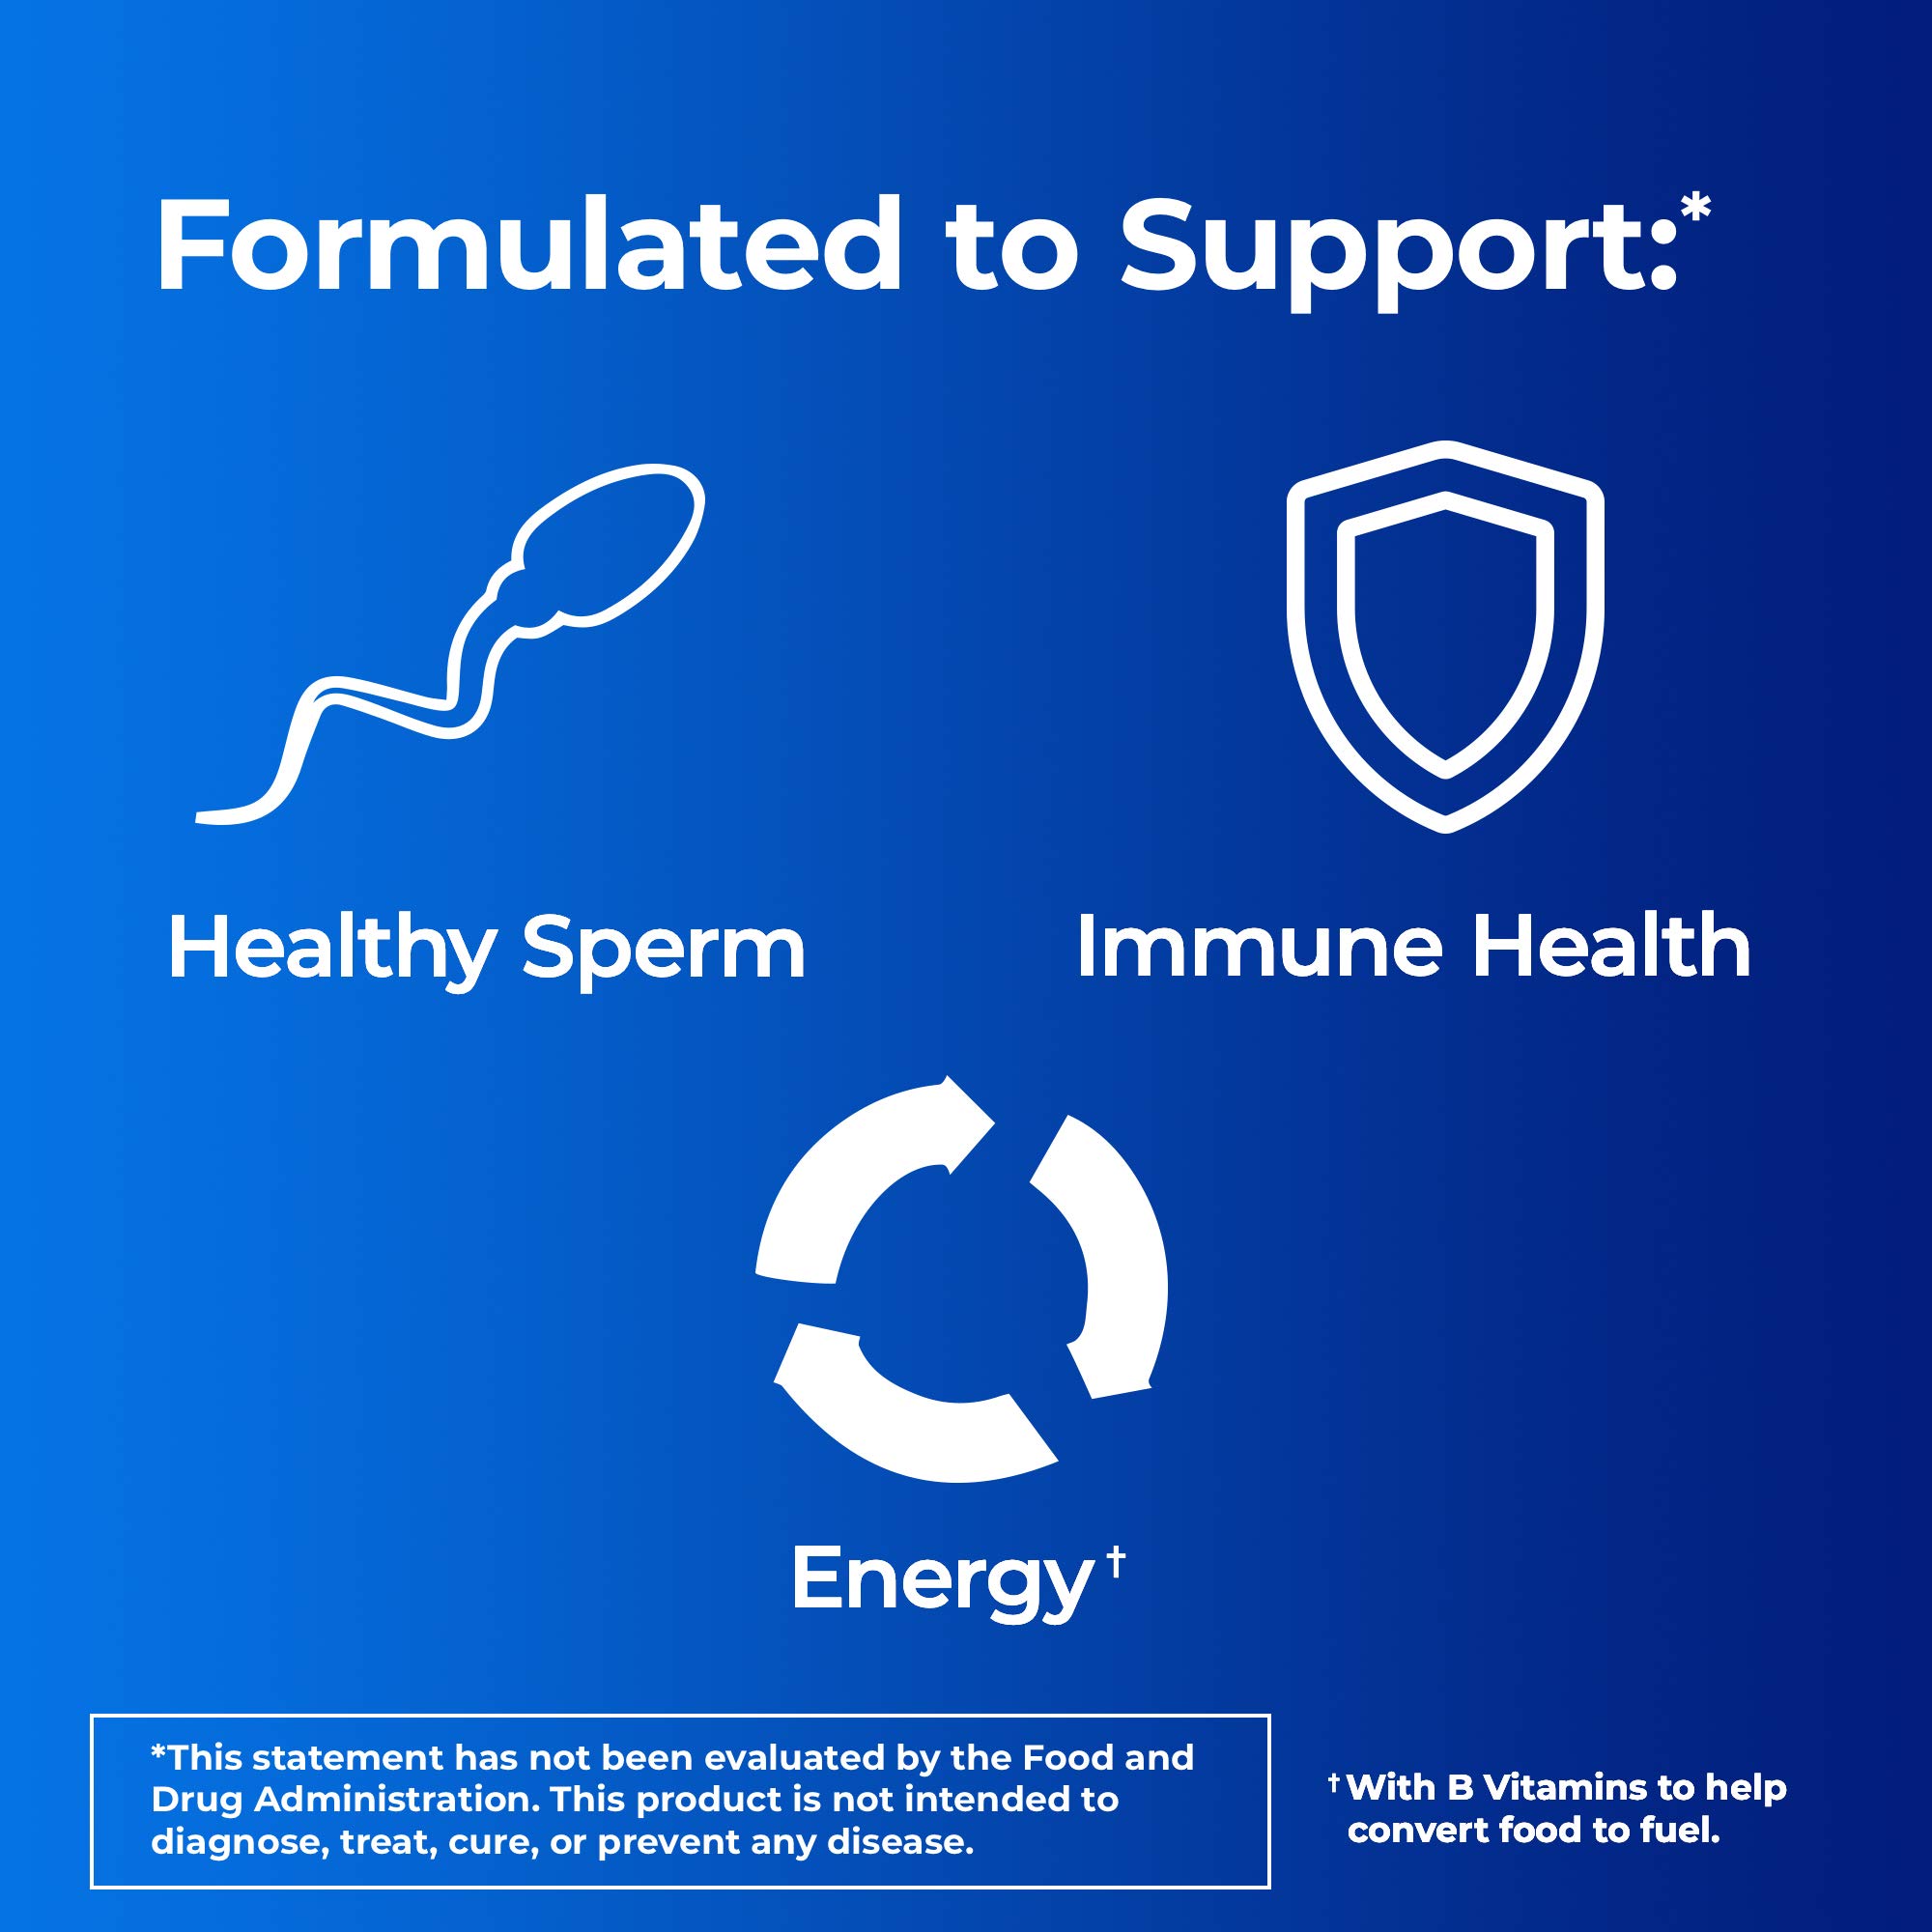 OLLY Ultra Strength Prenatal Multivitamin Softgels, Supports Healthy Growth & One A Day Men's Pre-Conception Health Multivitamin to Support Healthy Sperm